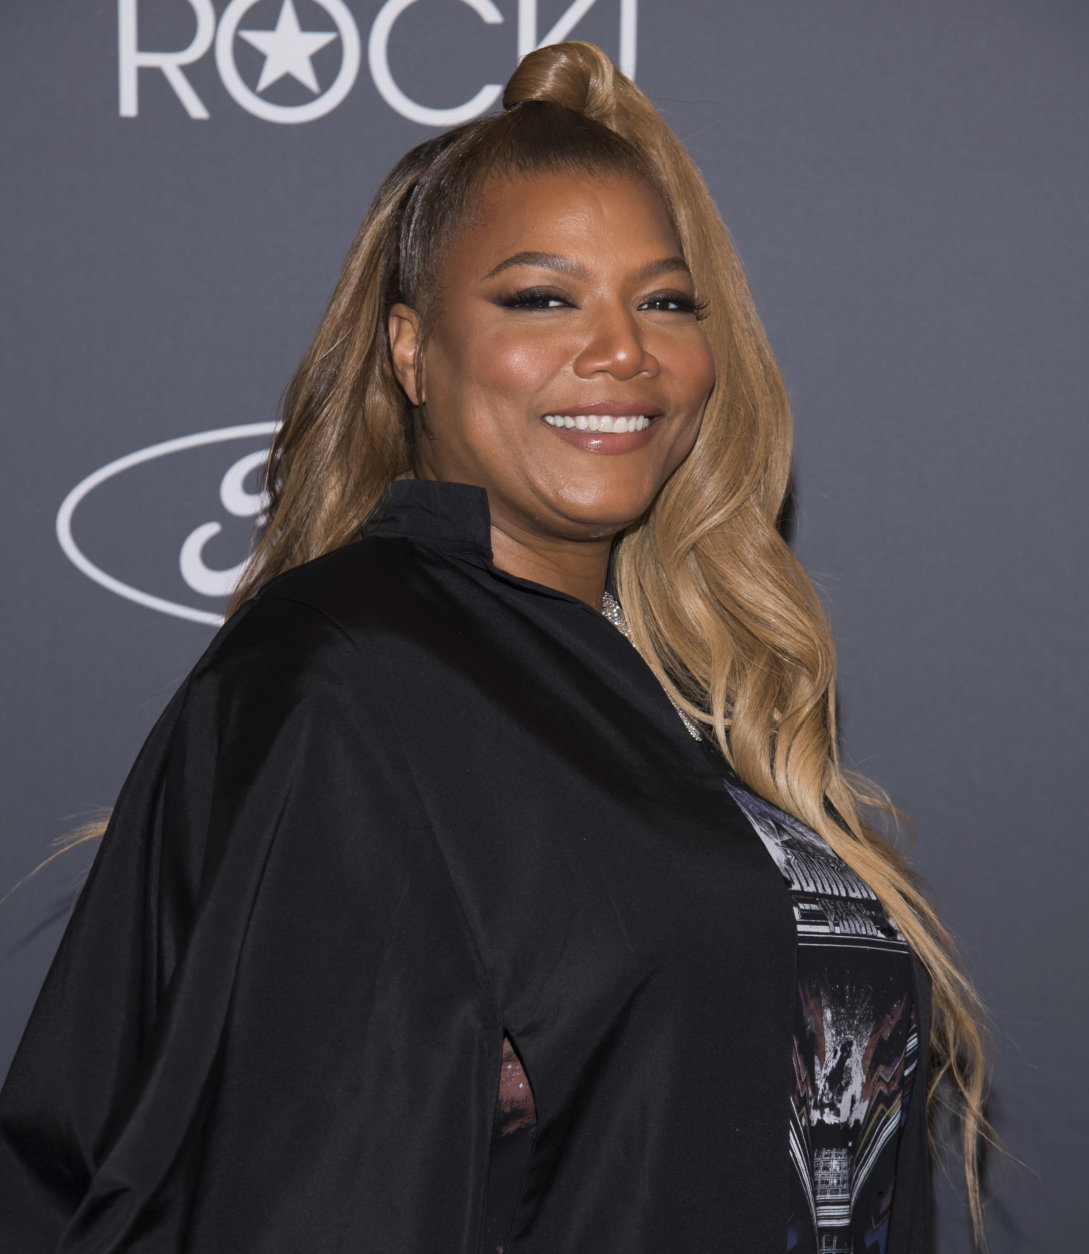 Queen Latifah attends the Black Girls Rock! Awards at New Jersey Performing Arts Center on Sunday, Aug. 26, 2018, in Newark, N.J. (Photo by Charles Sykes/Invision/AP)